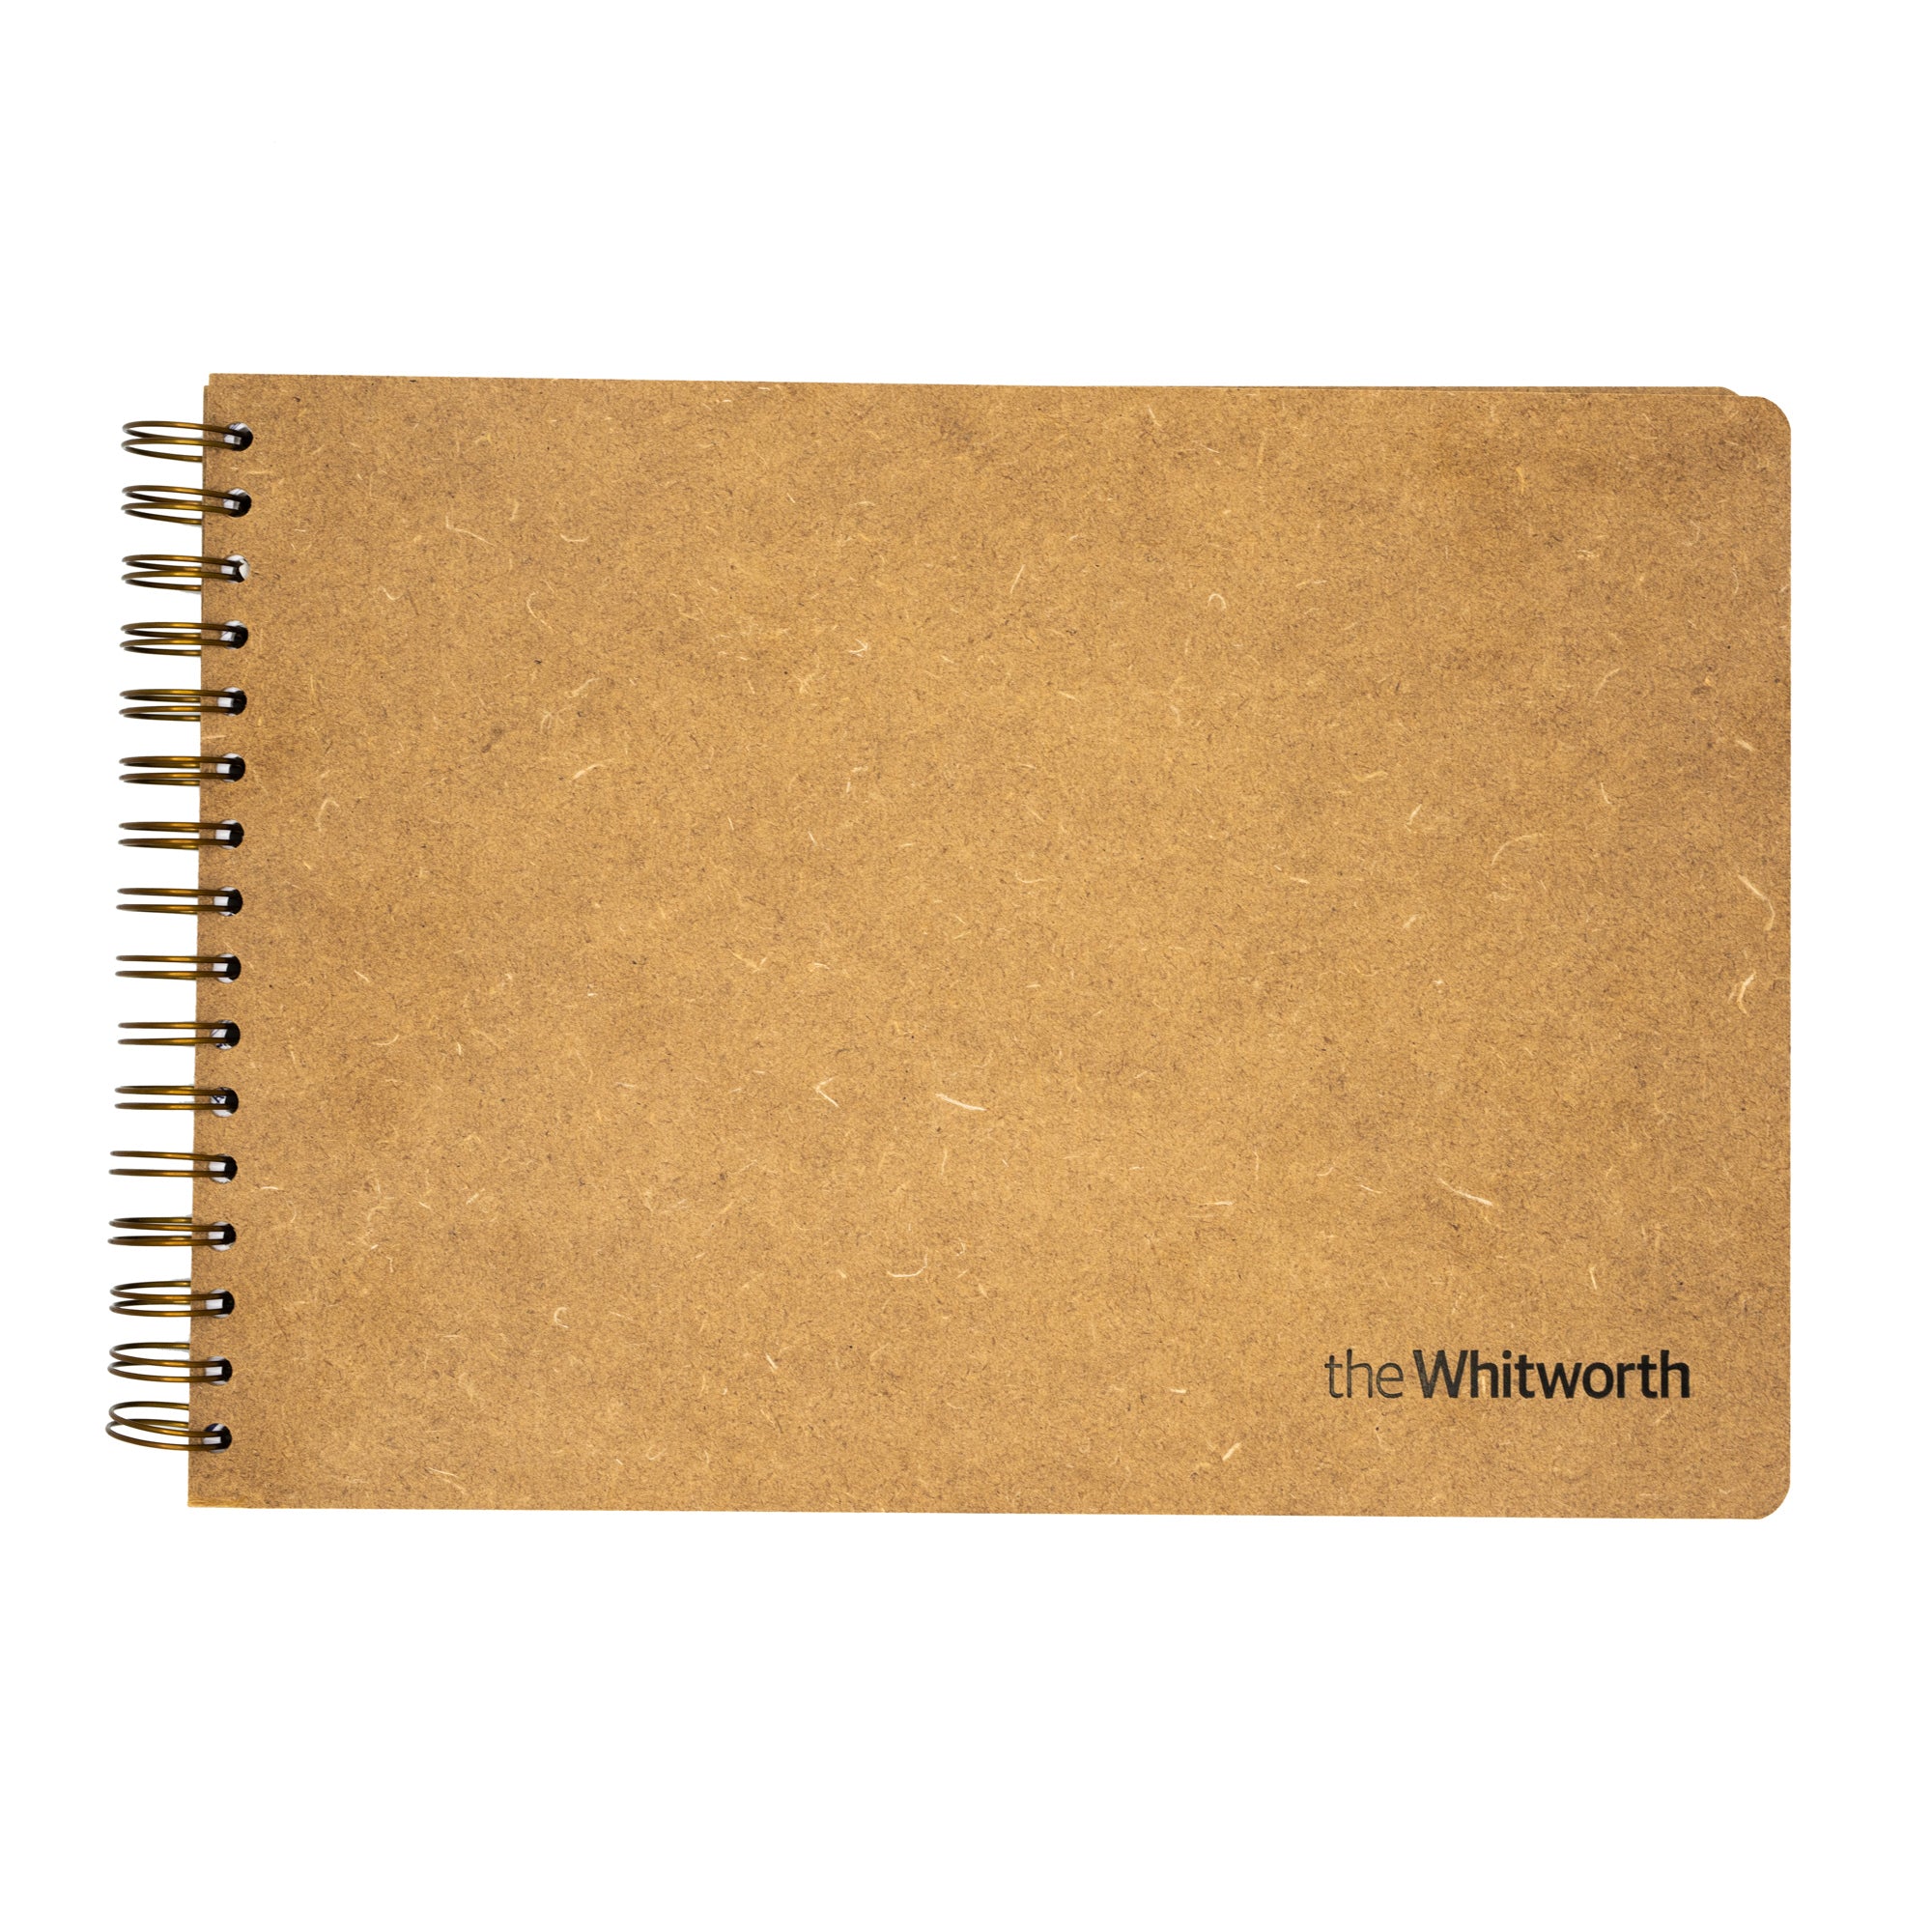 Brown sketchbook with the Whitworth branding in the bottom right corner of the front cover